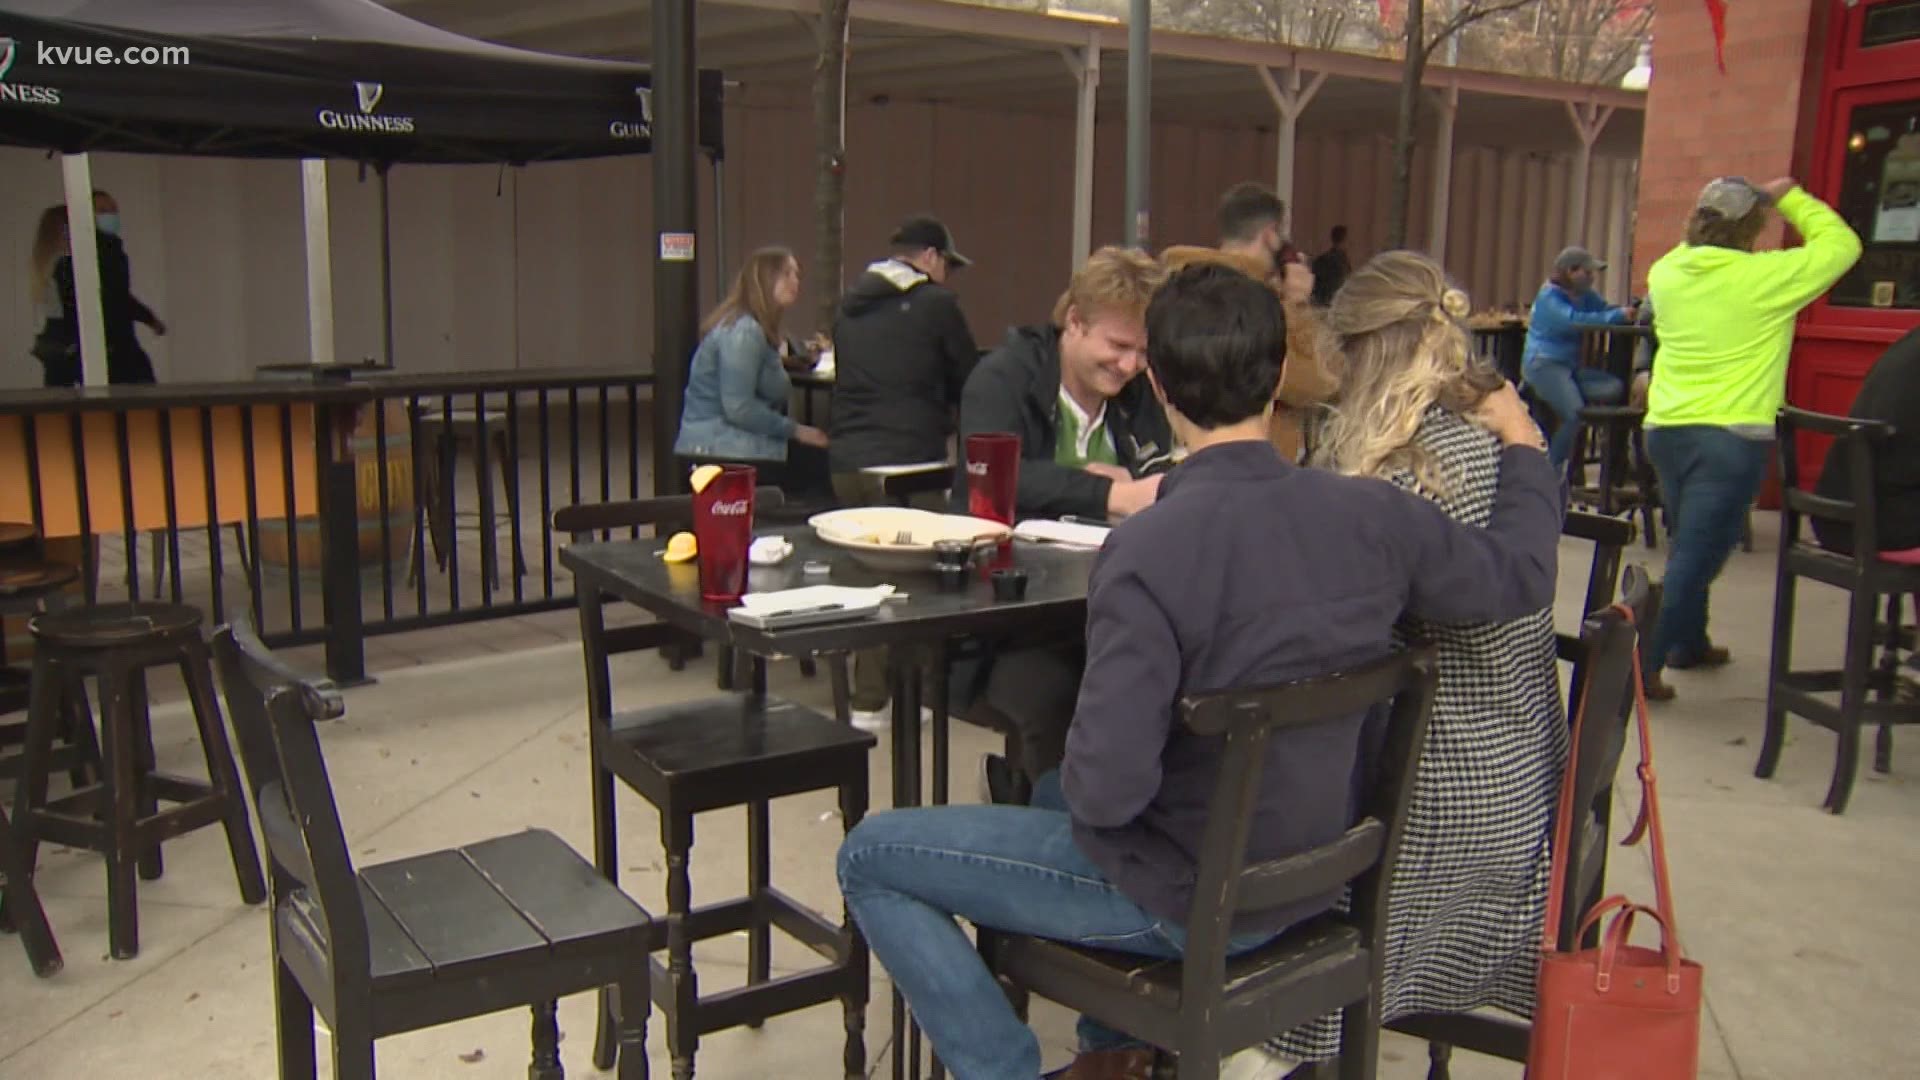 Patios at restaurants in the Mueller community were busy during brunch while still enforcing mask and social distancing.